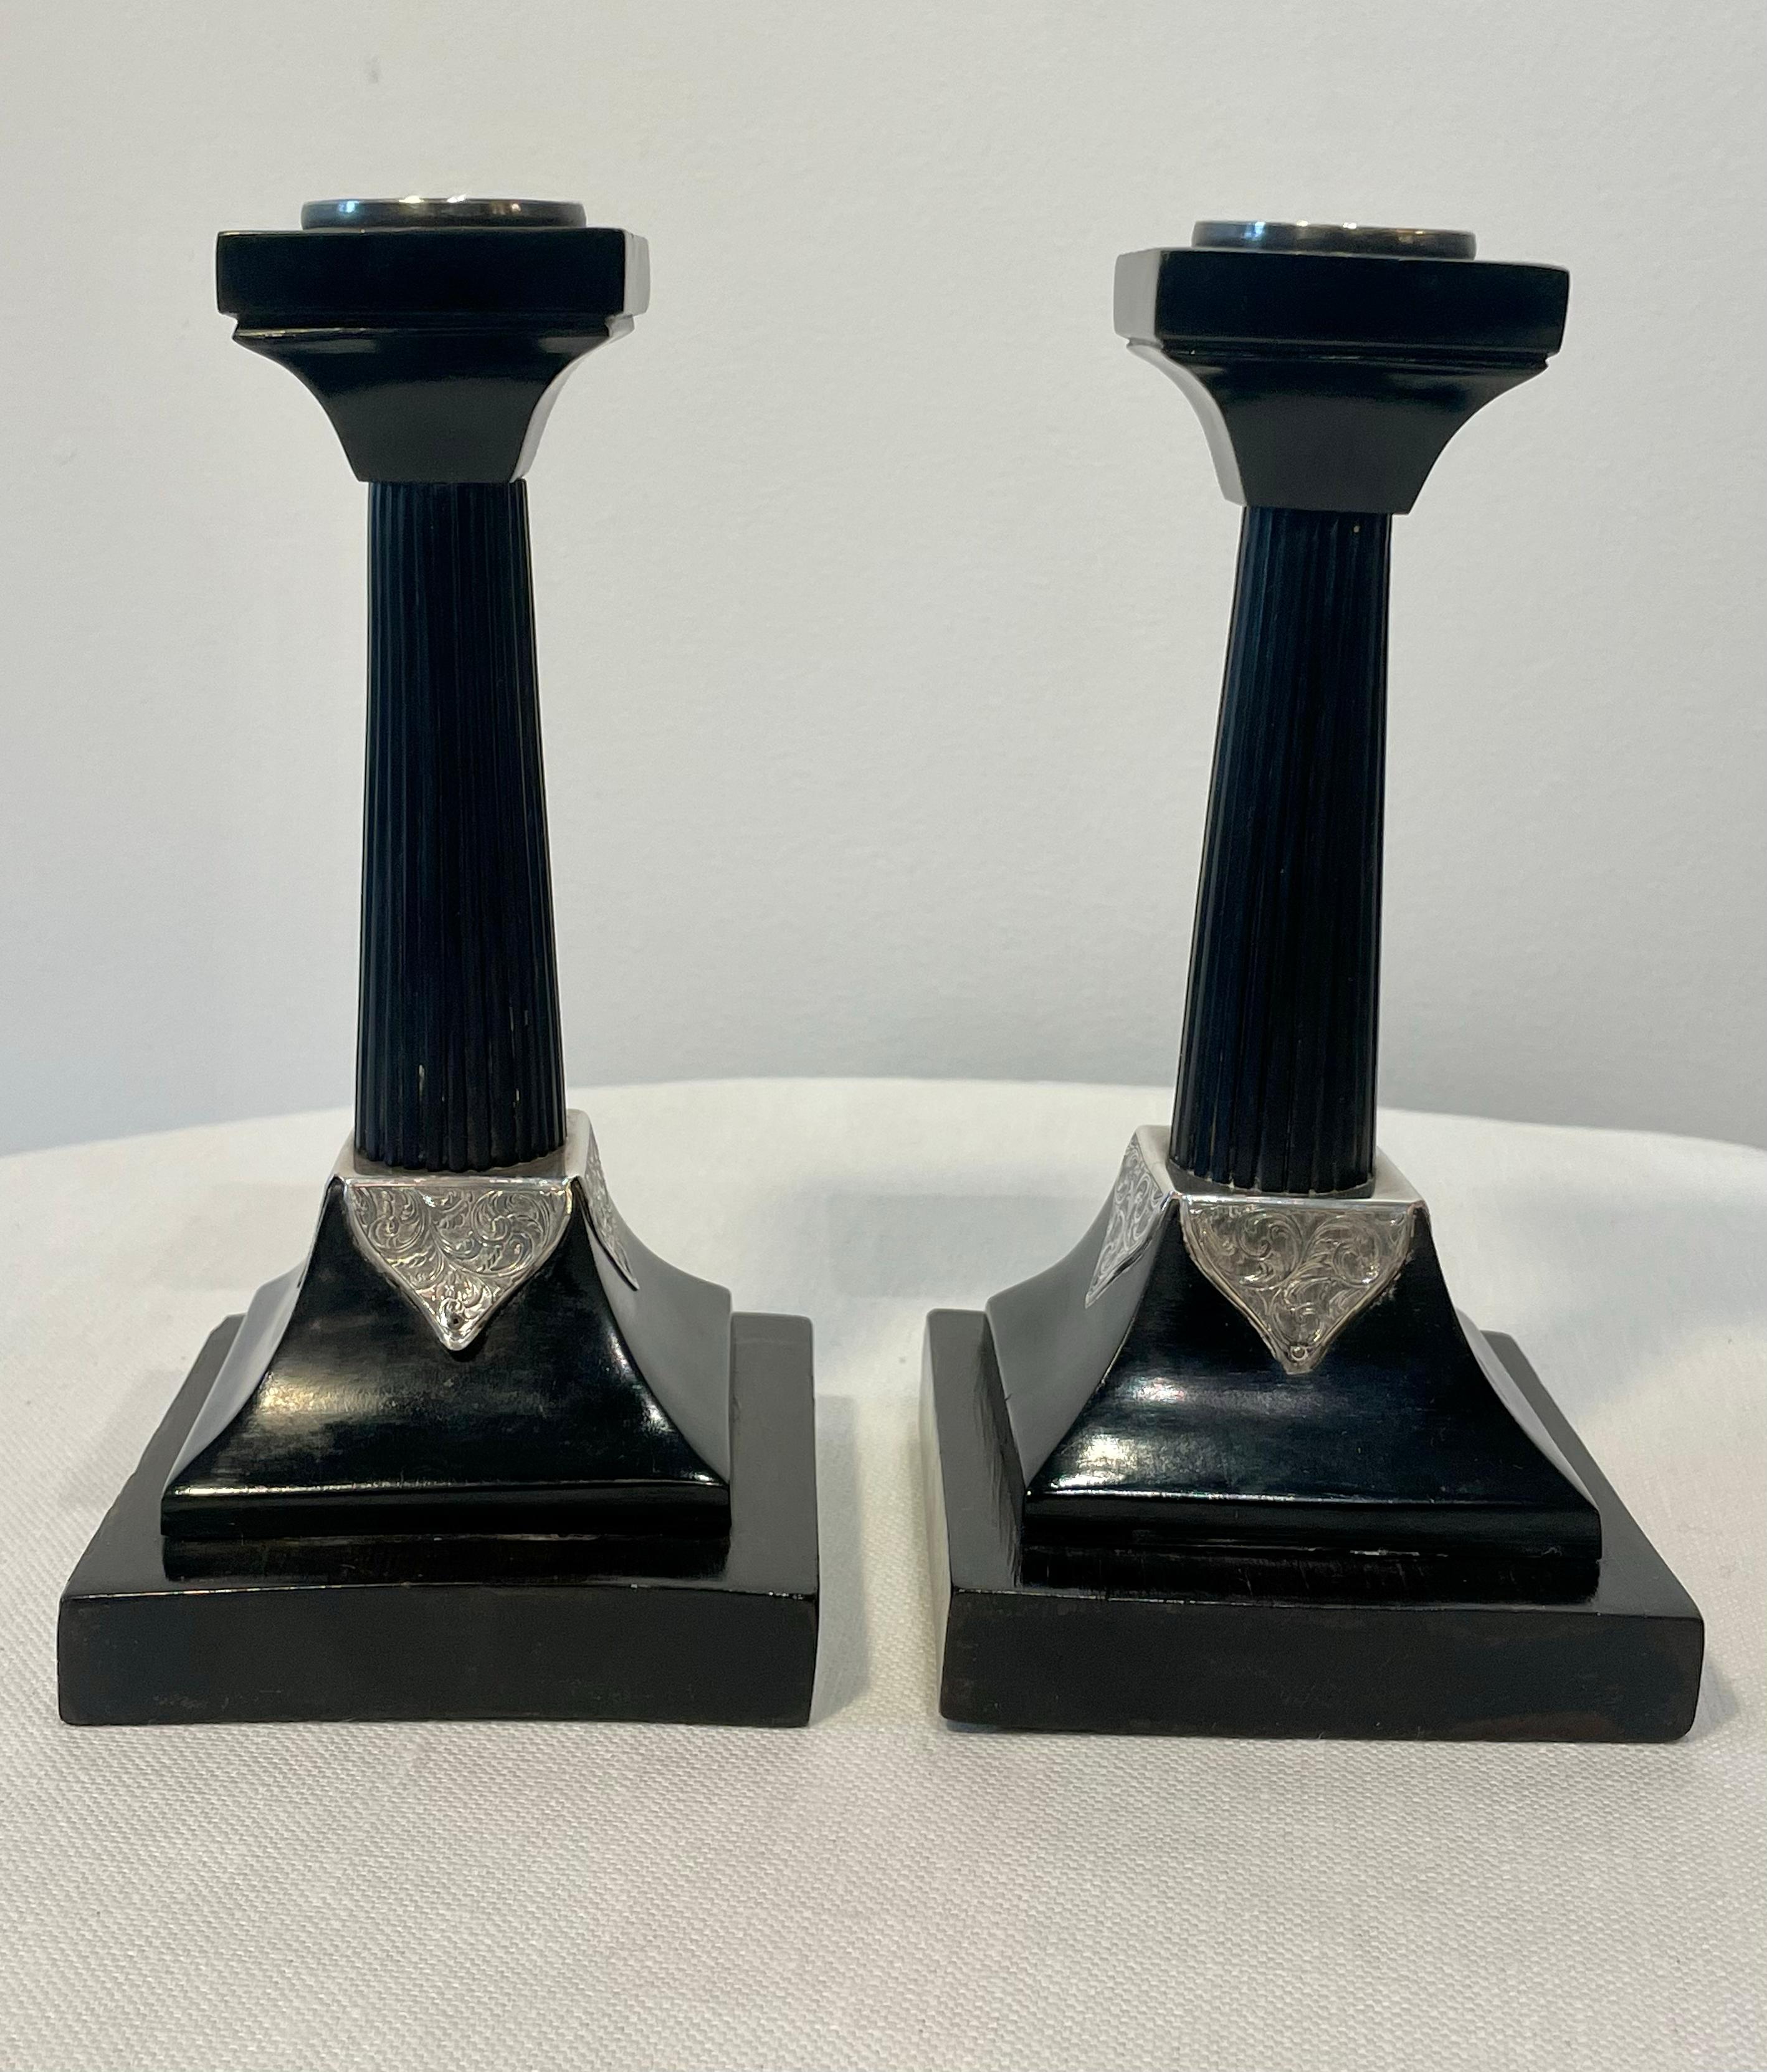 Pair of English silver-mounted arts and crafts ebony candlesticks. In classical revival taste with engraved and chased sterling silver detail. Circa 1915.  